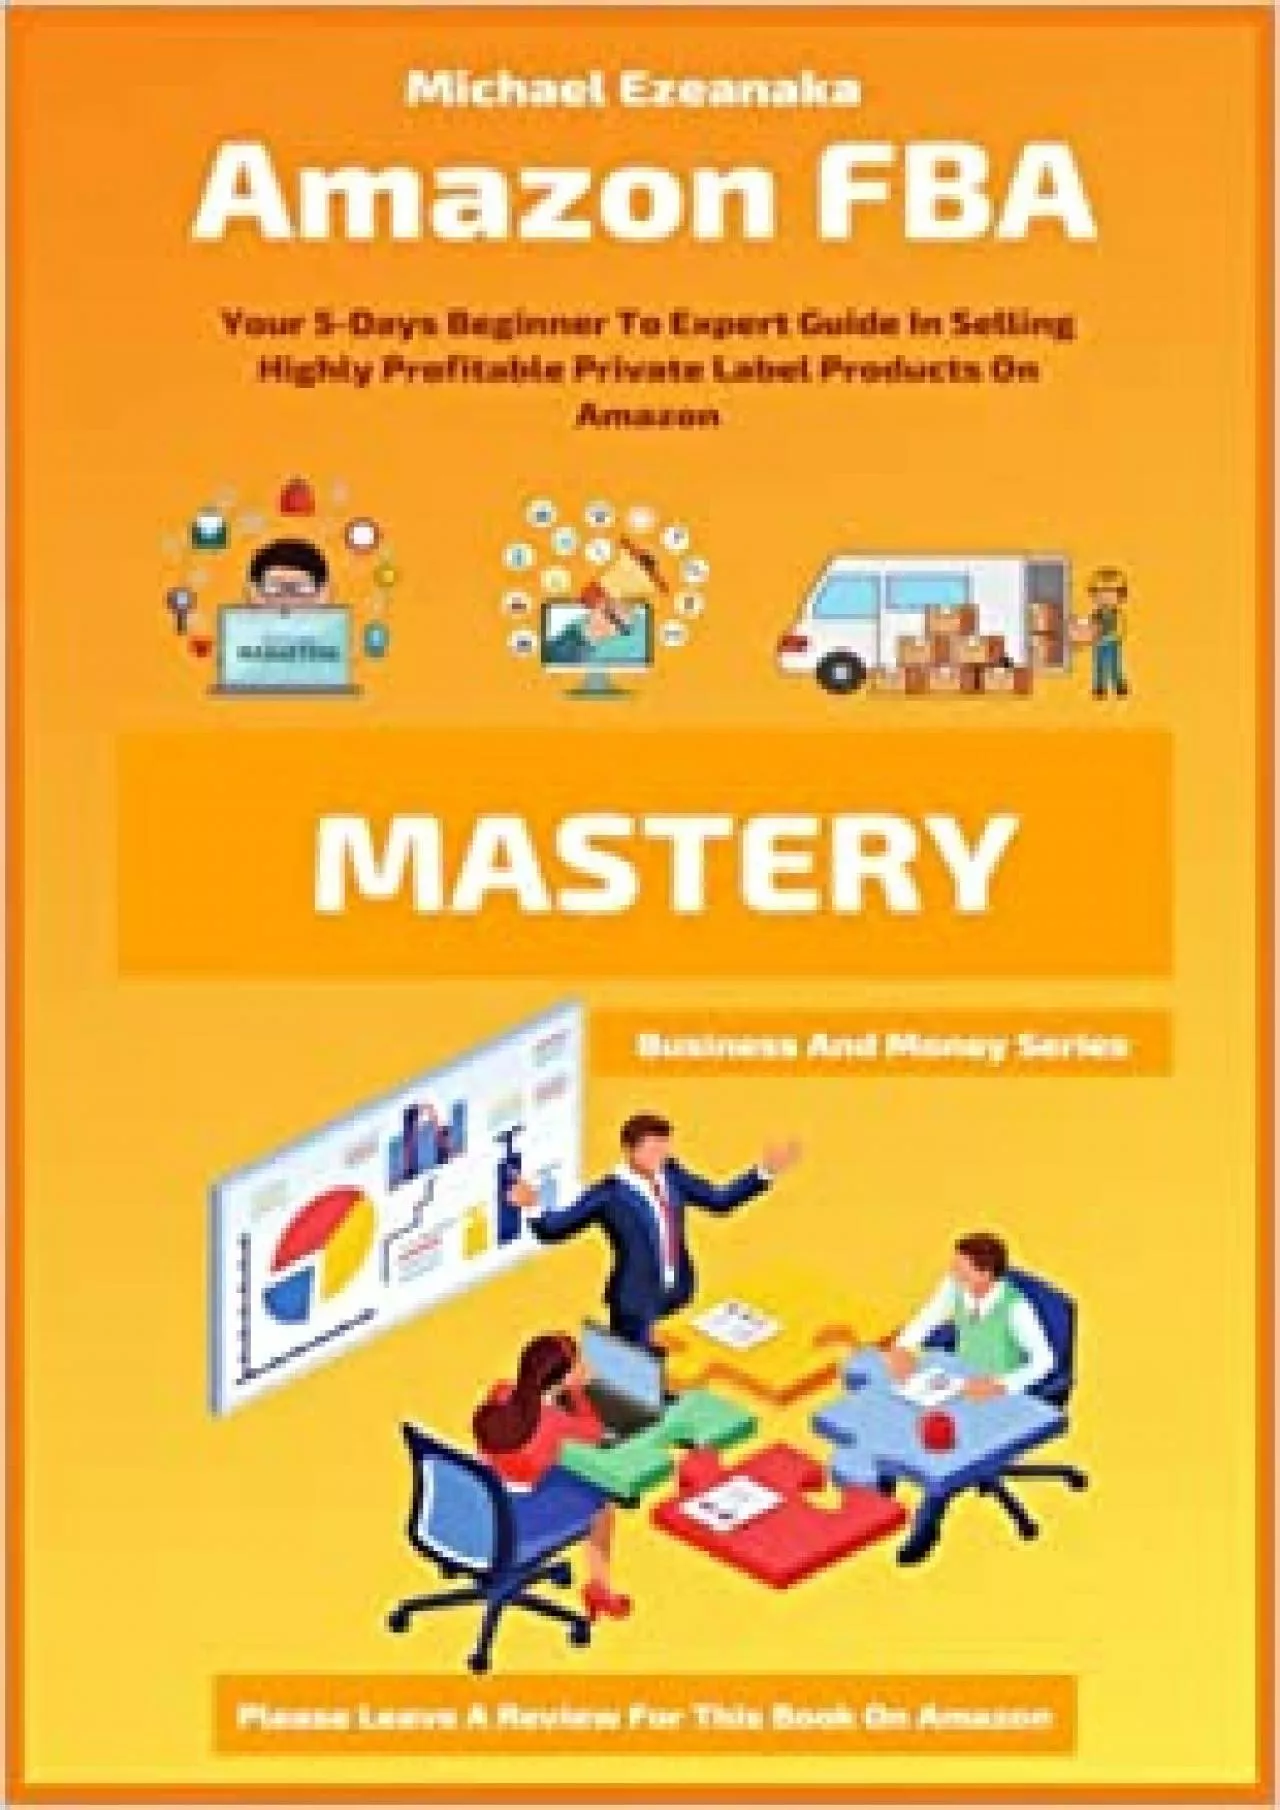 Amazon FBA Mastery Your 5Days Beginner To Expert Guide In Selling Highly Profitable Private